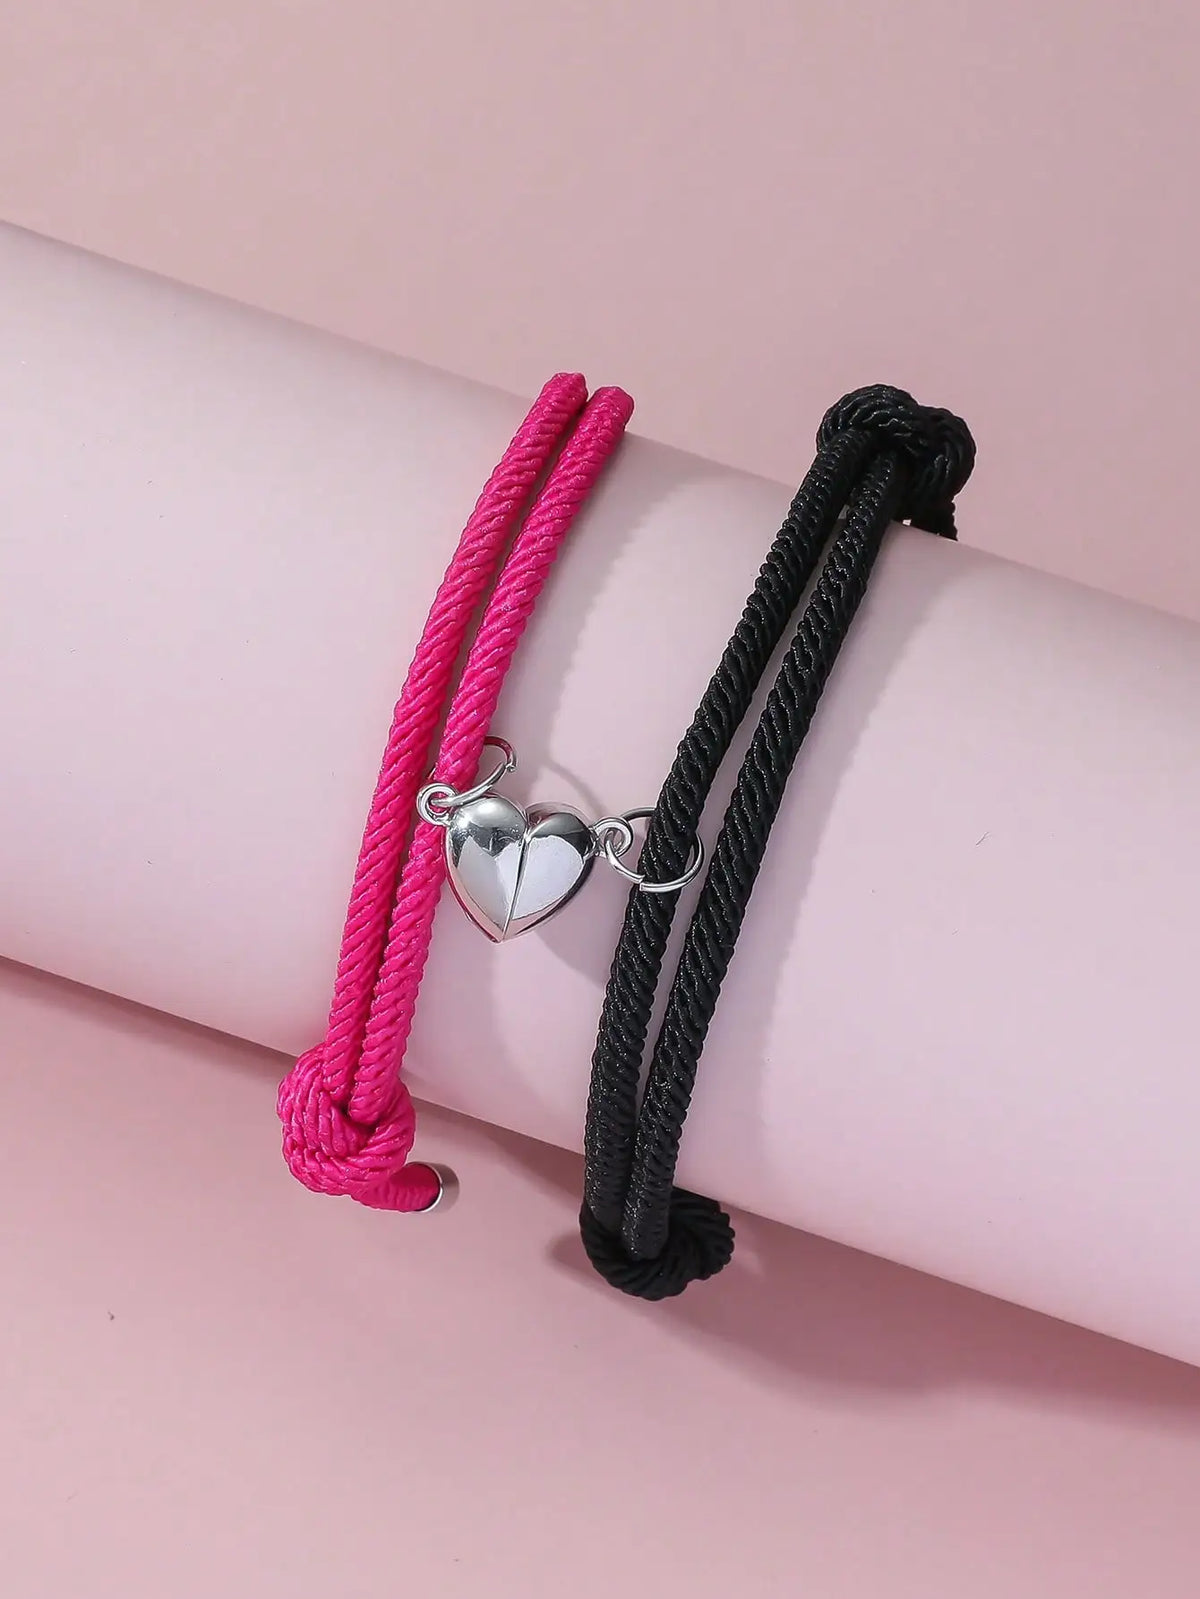 2 Pice Color Black White Hand Rope Love Magnetic Couple Good Friend Good Brother Party Student Travel Fashion Elegant Silver Mul